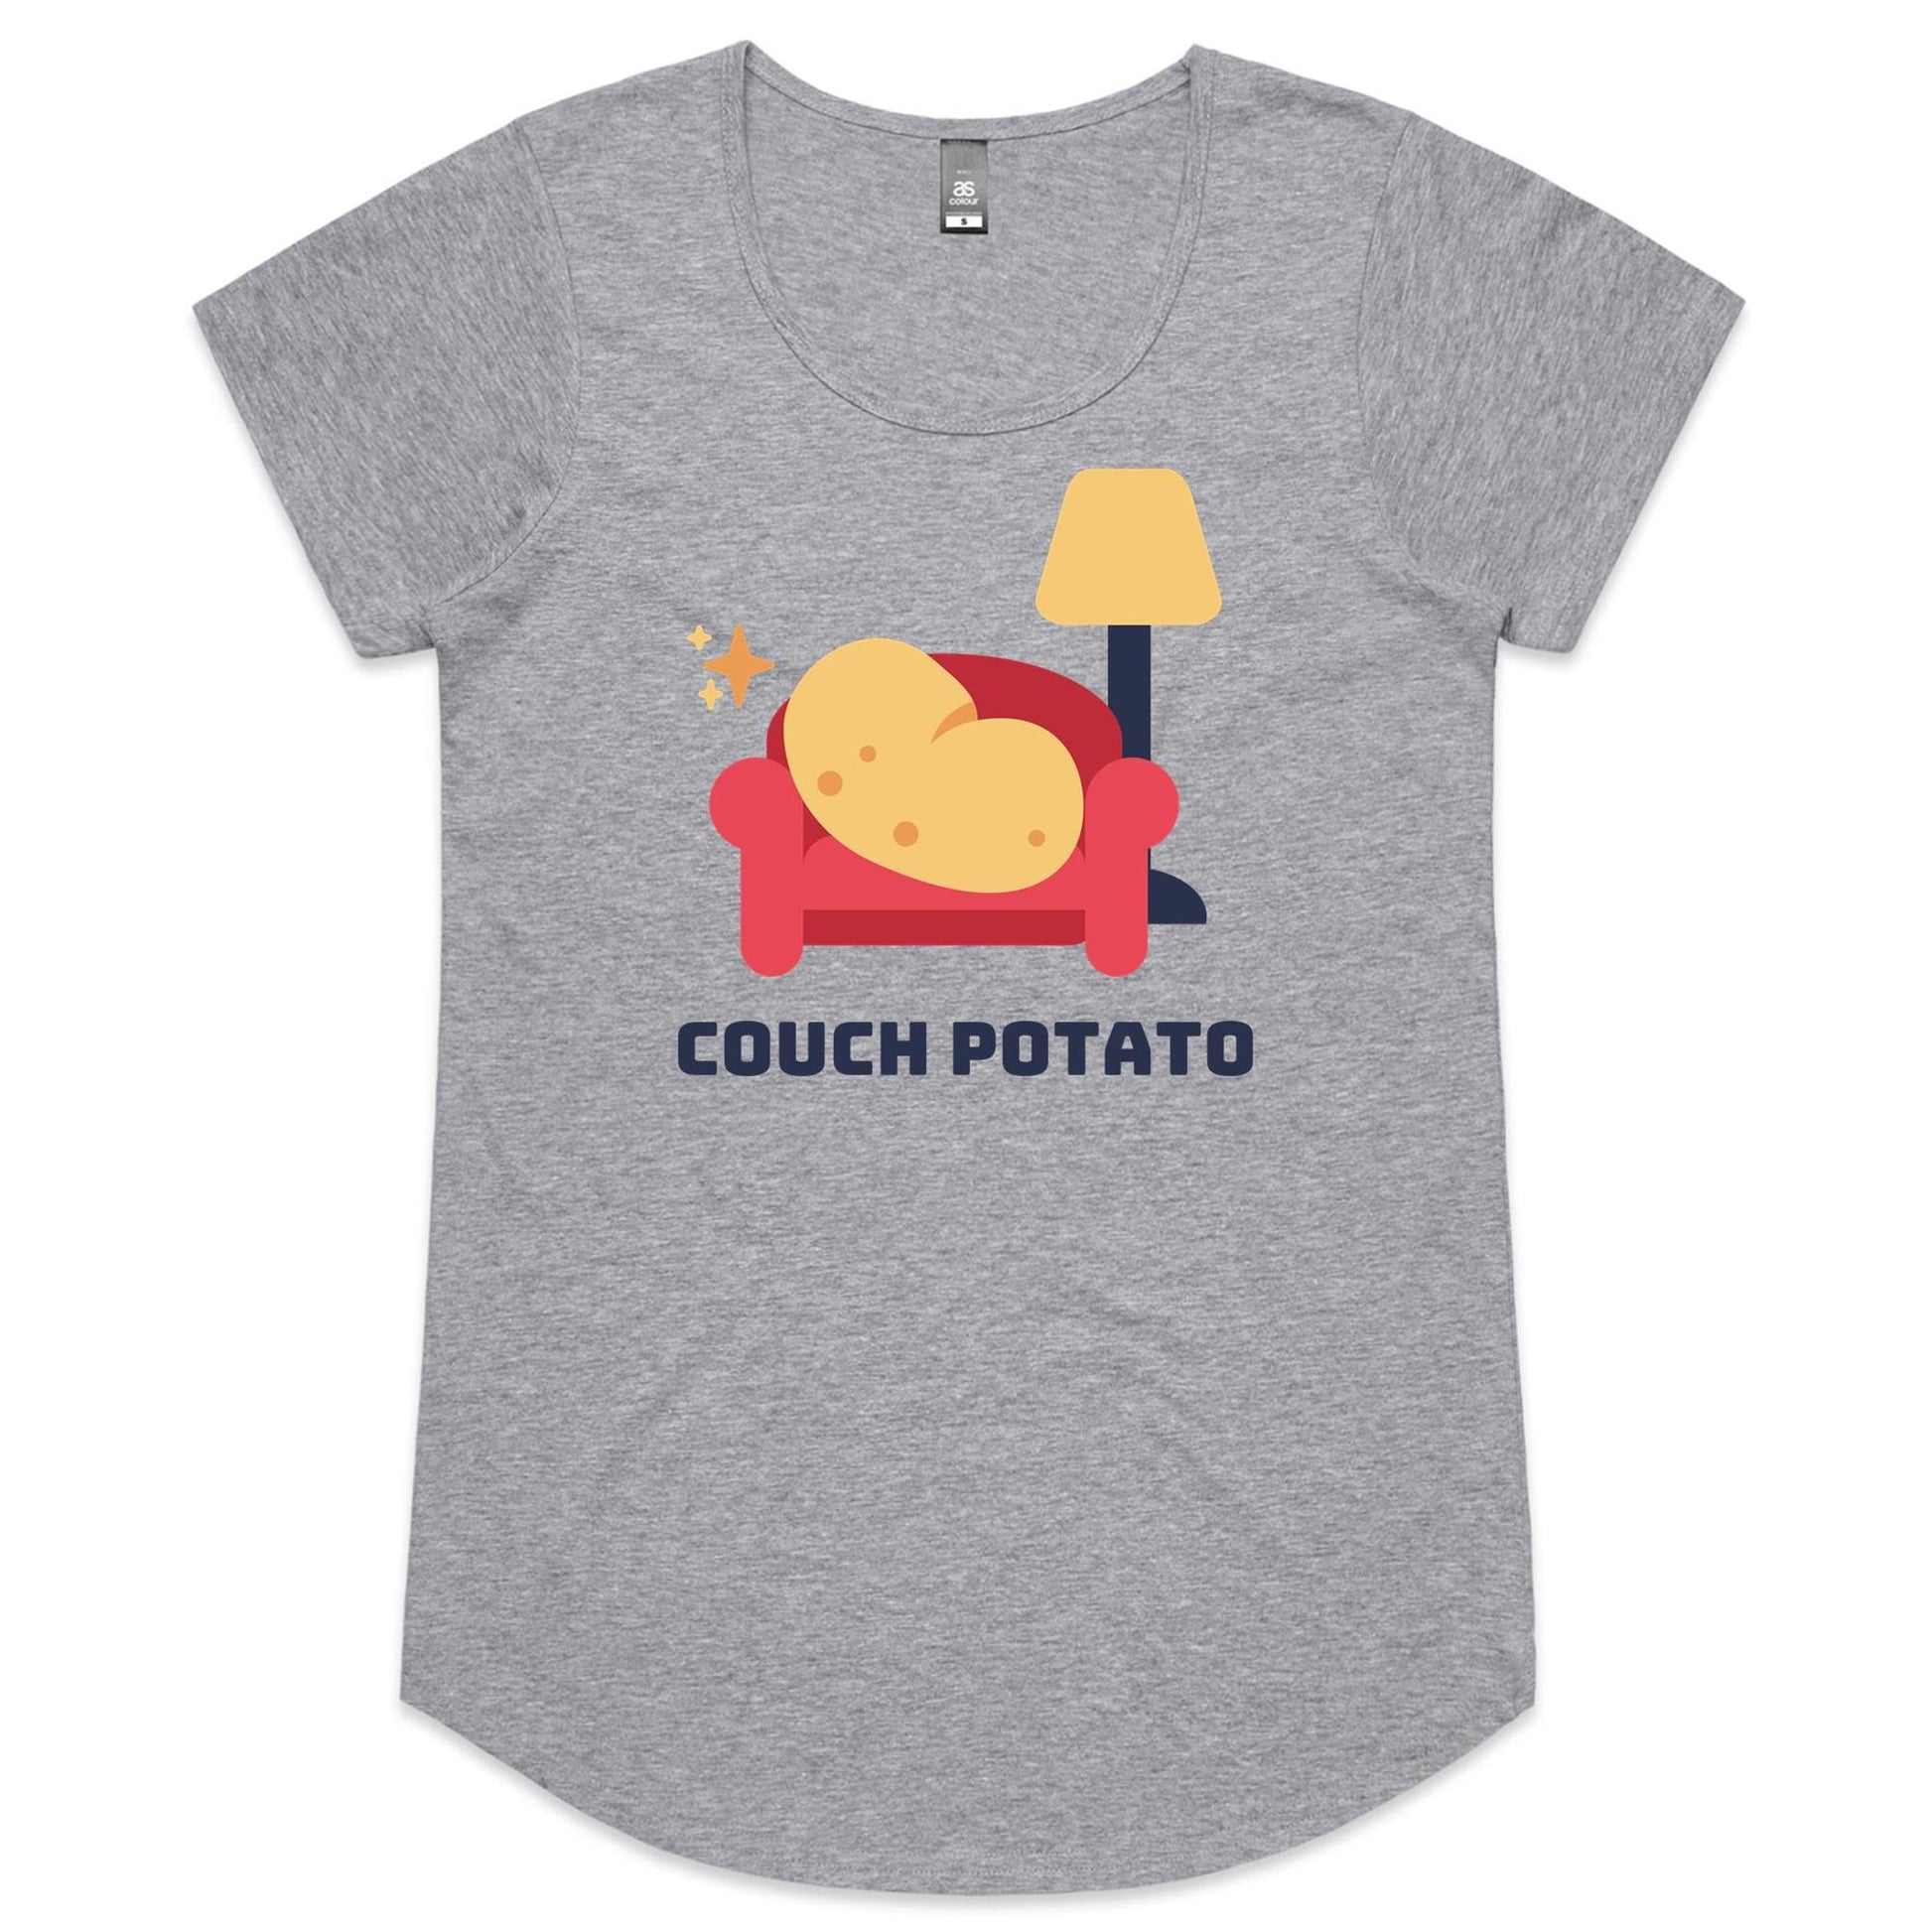 Couch Potato - Womens Scoop Neck T-Shirt Grey Marle Womens Scoop Neck T-shirt Funny